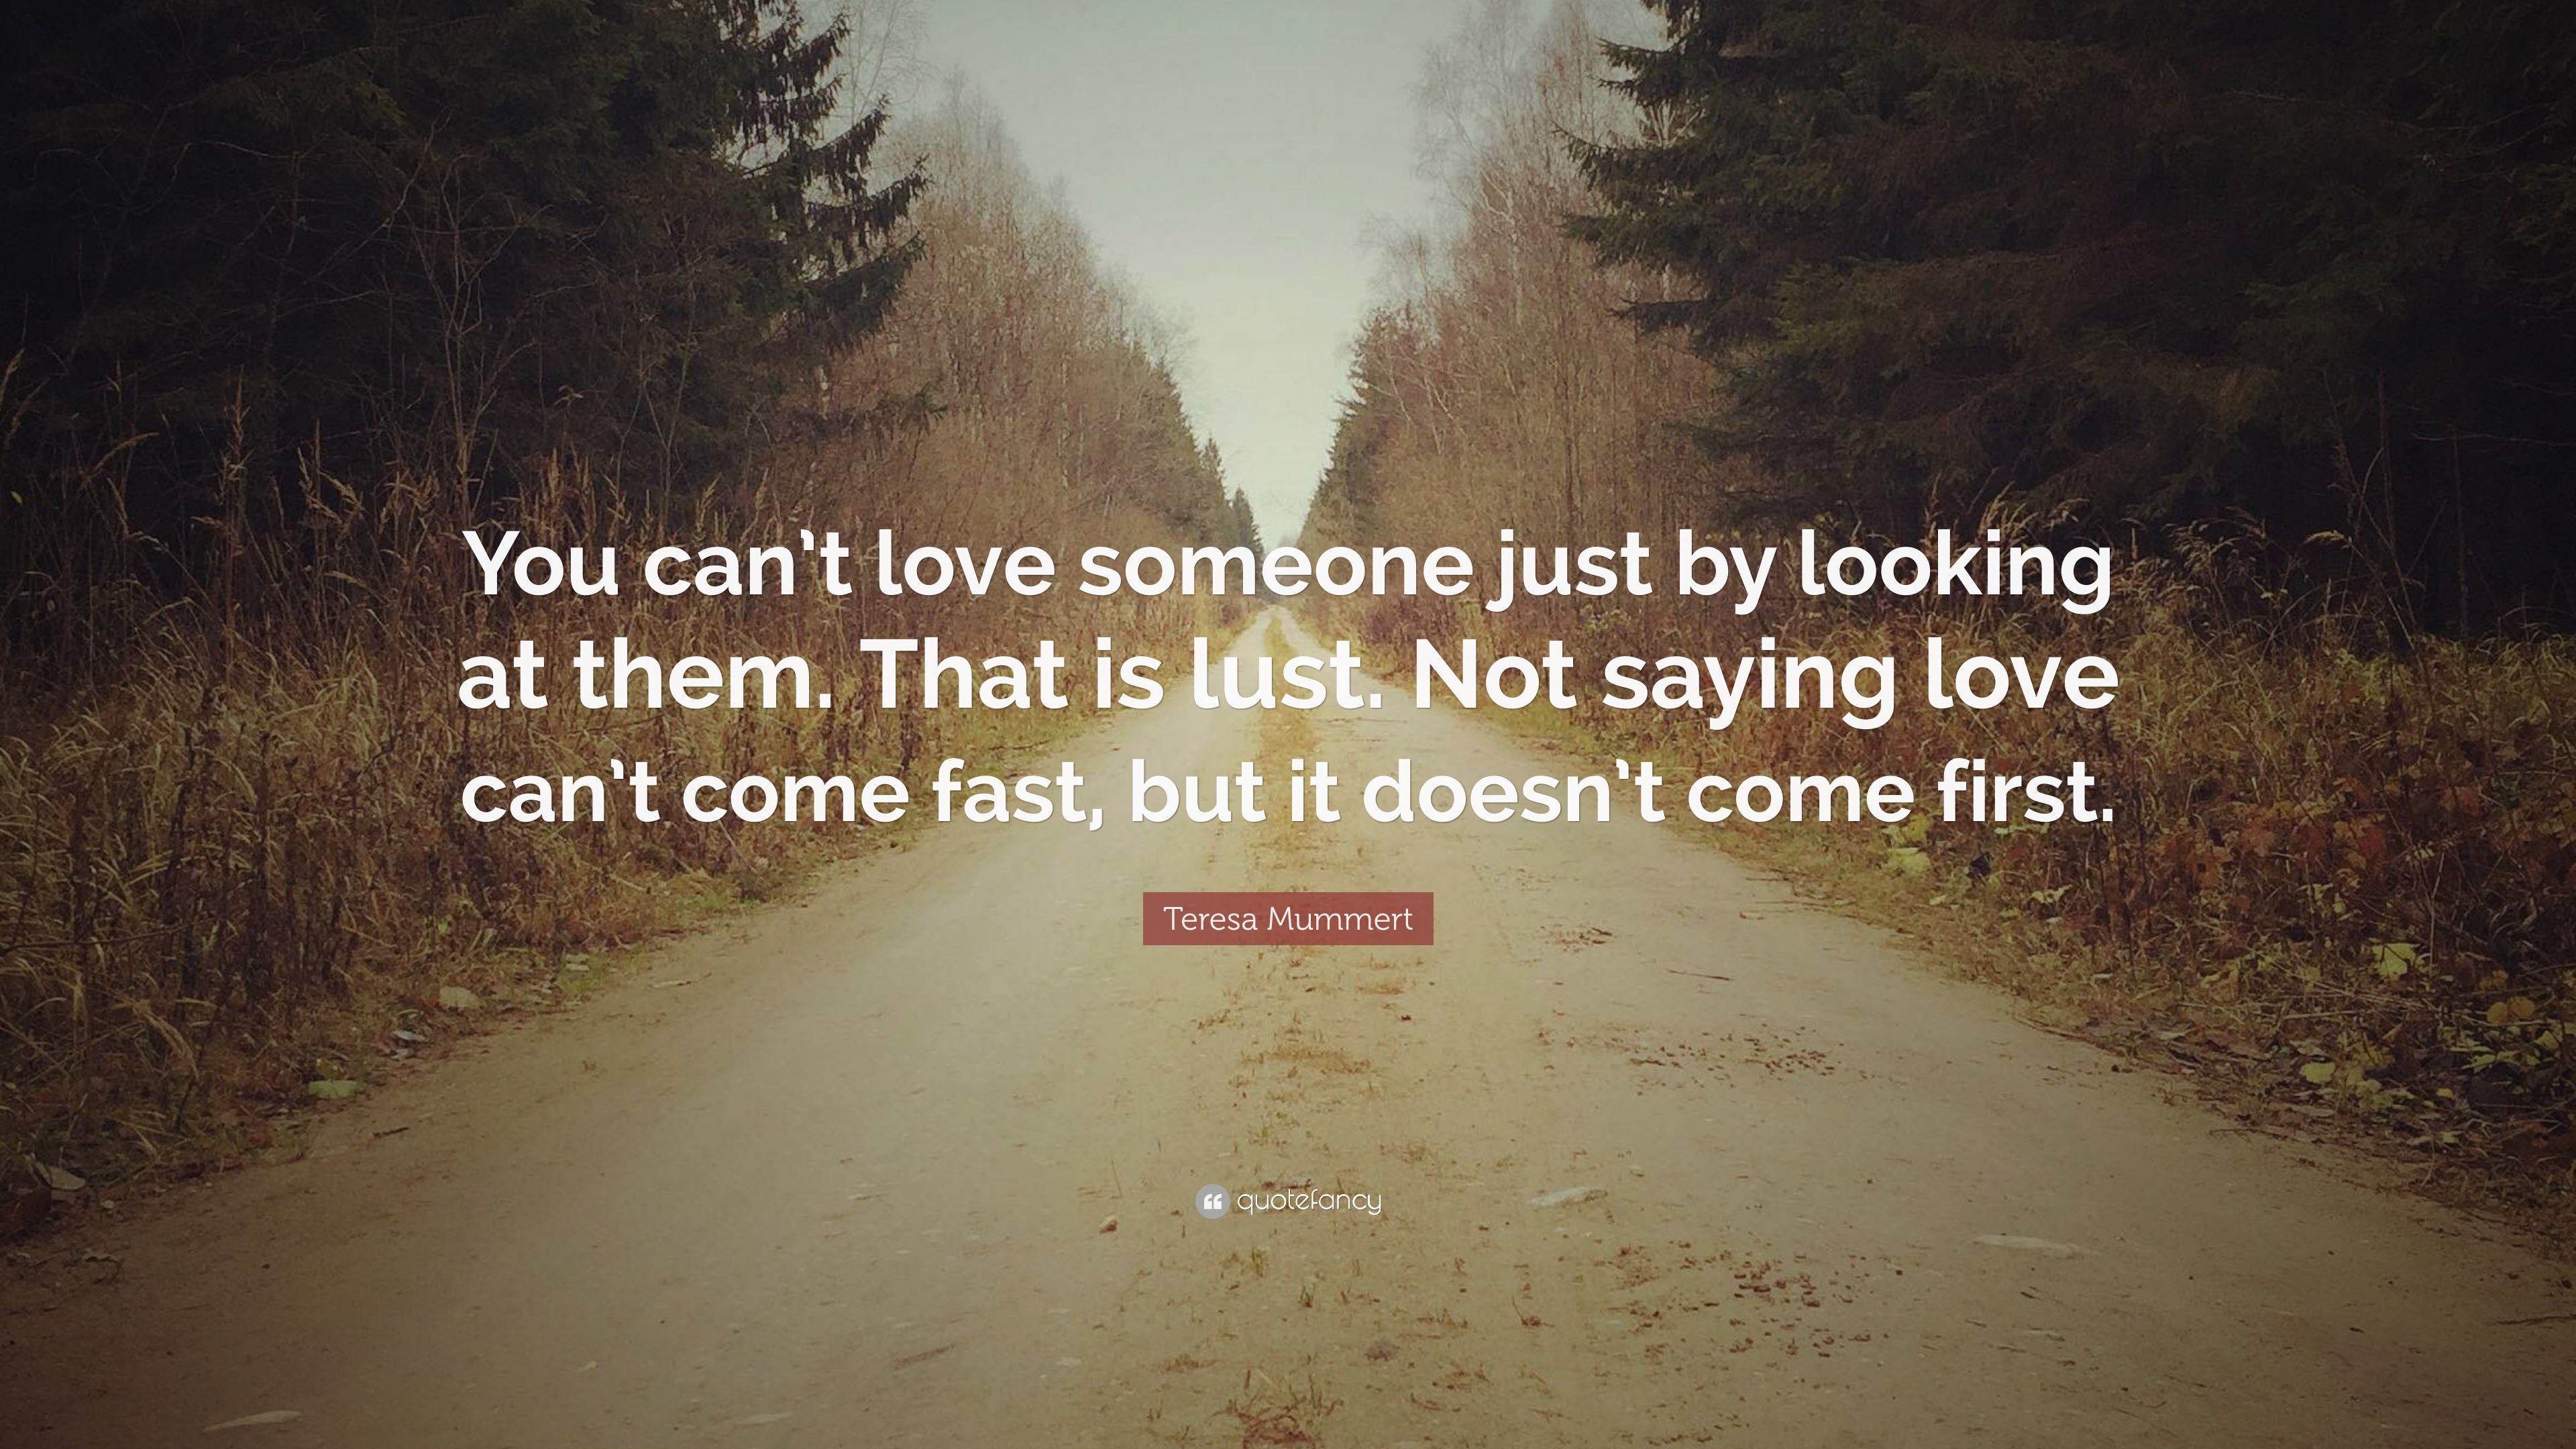 Teresa Mummert Quote “You can t love someone just by looking at them